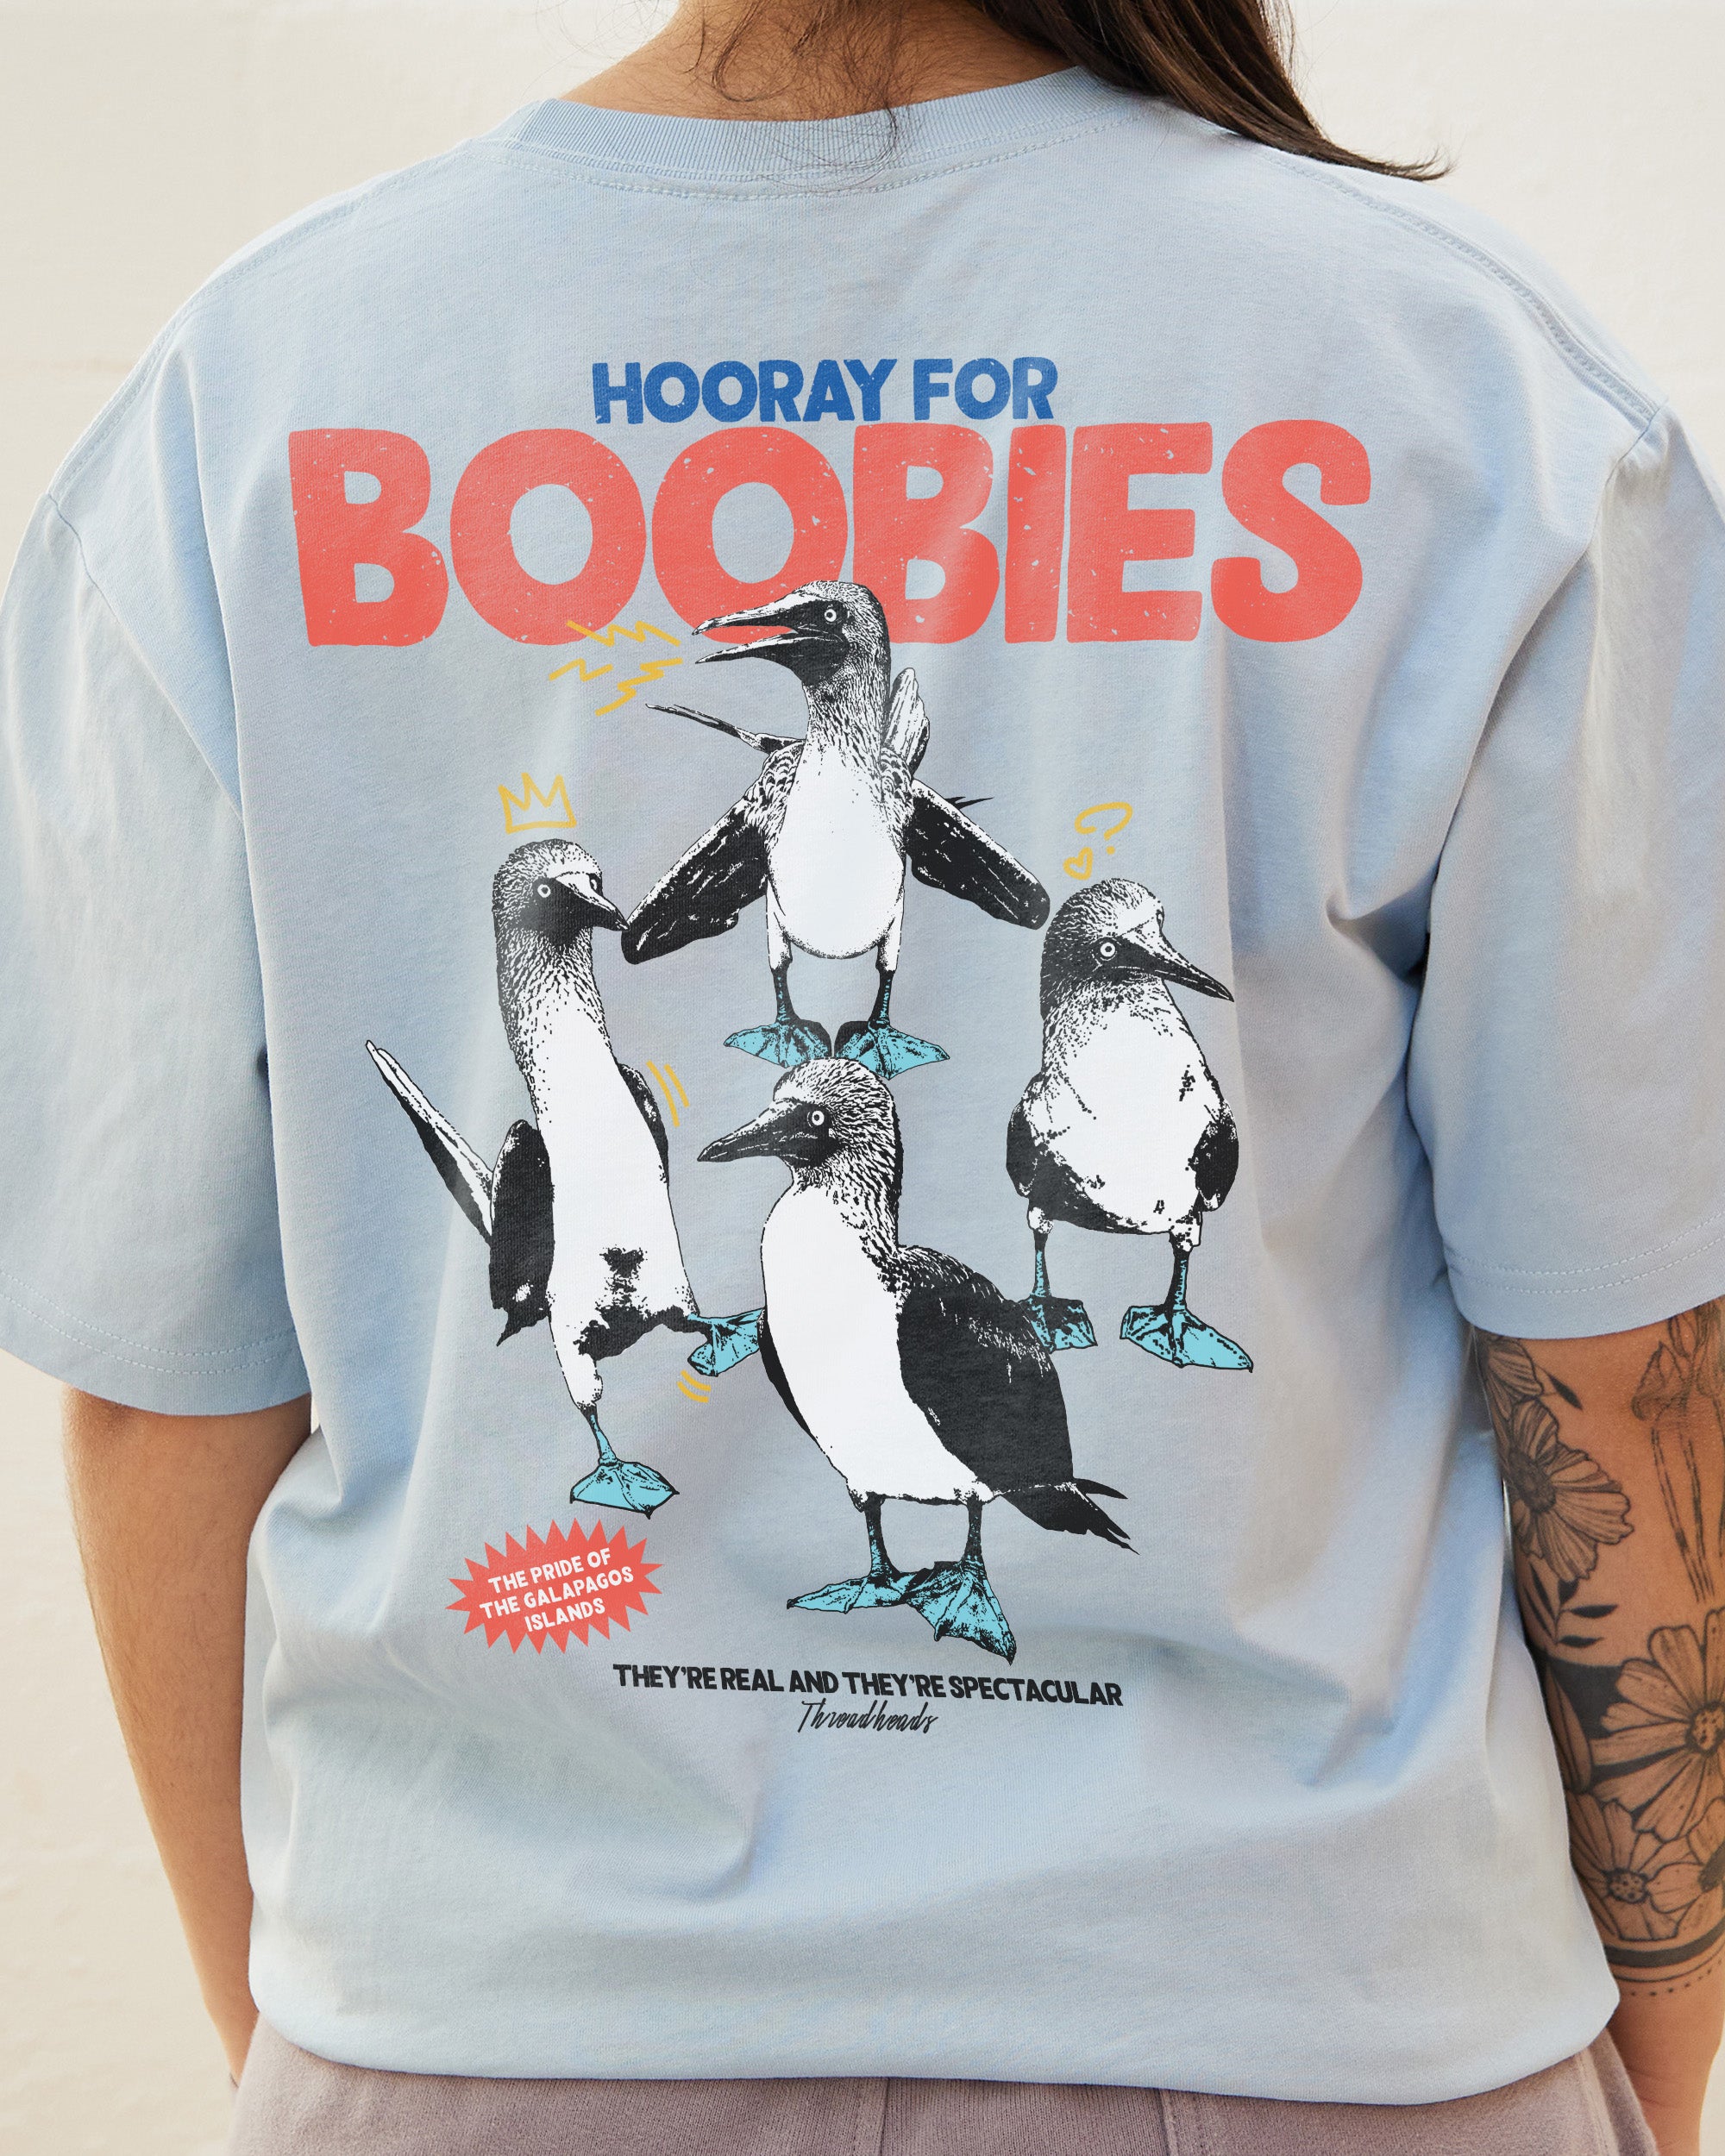 Hooray for Boobies Front and Back T-Shirt